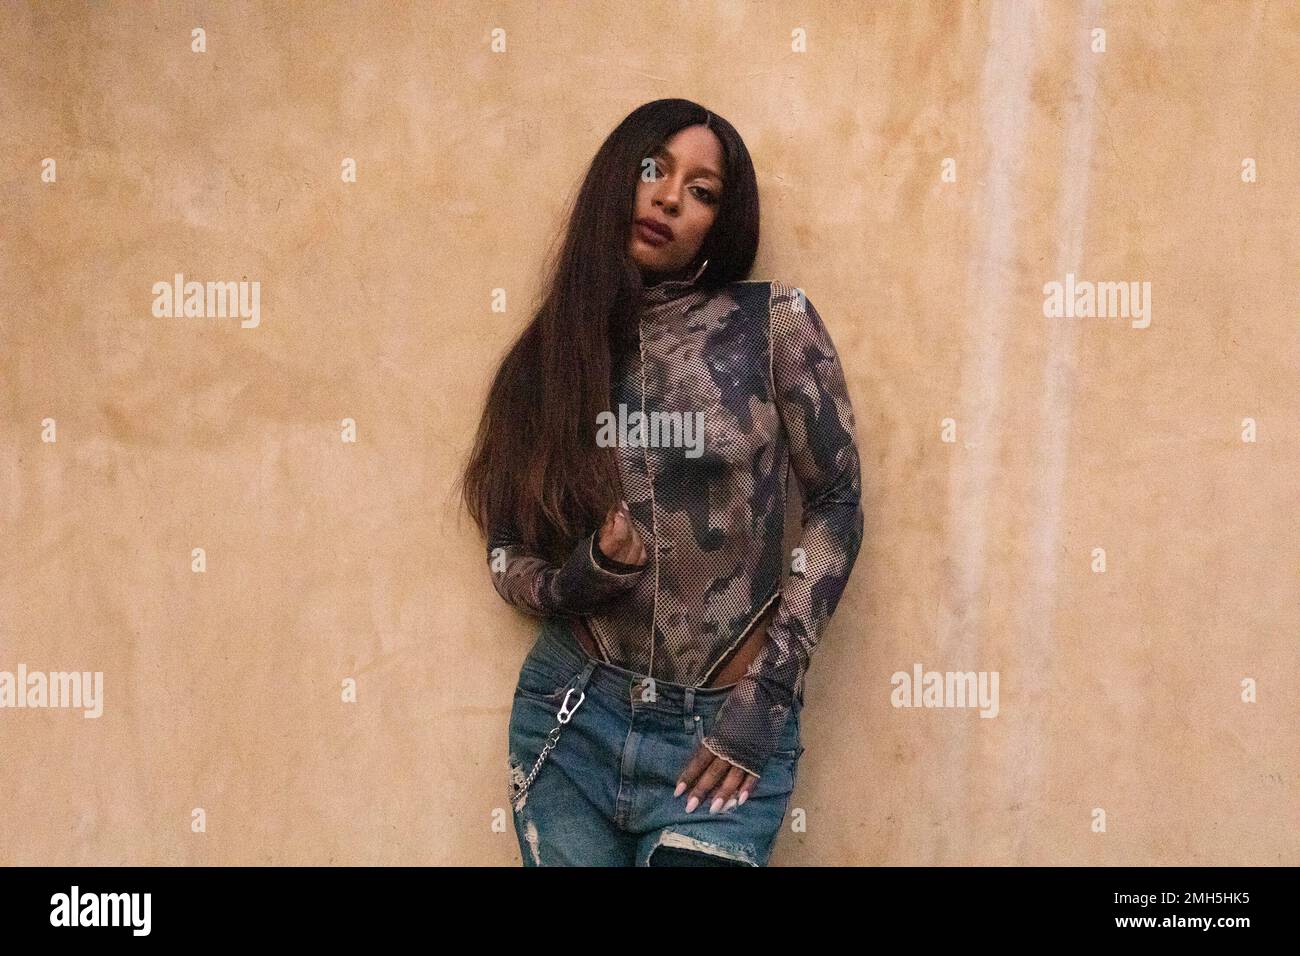 this dec 14 2019 photo shows music producer victoria monet during a portrait session in los angeles mont is nominated for two grammys album of the year and record of the year for co producing ariana grandes album thank u next and her single 7 rings photo by rebecca cabageinvisionap 2MH5HK5